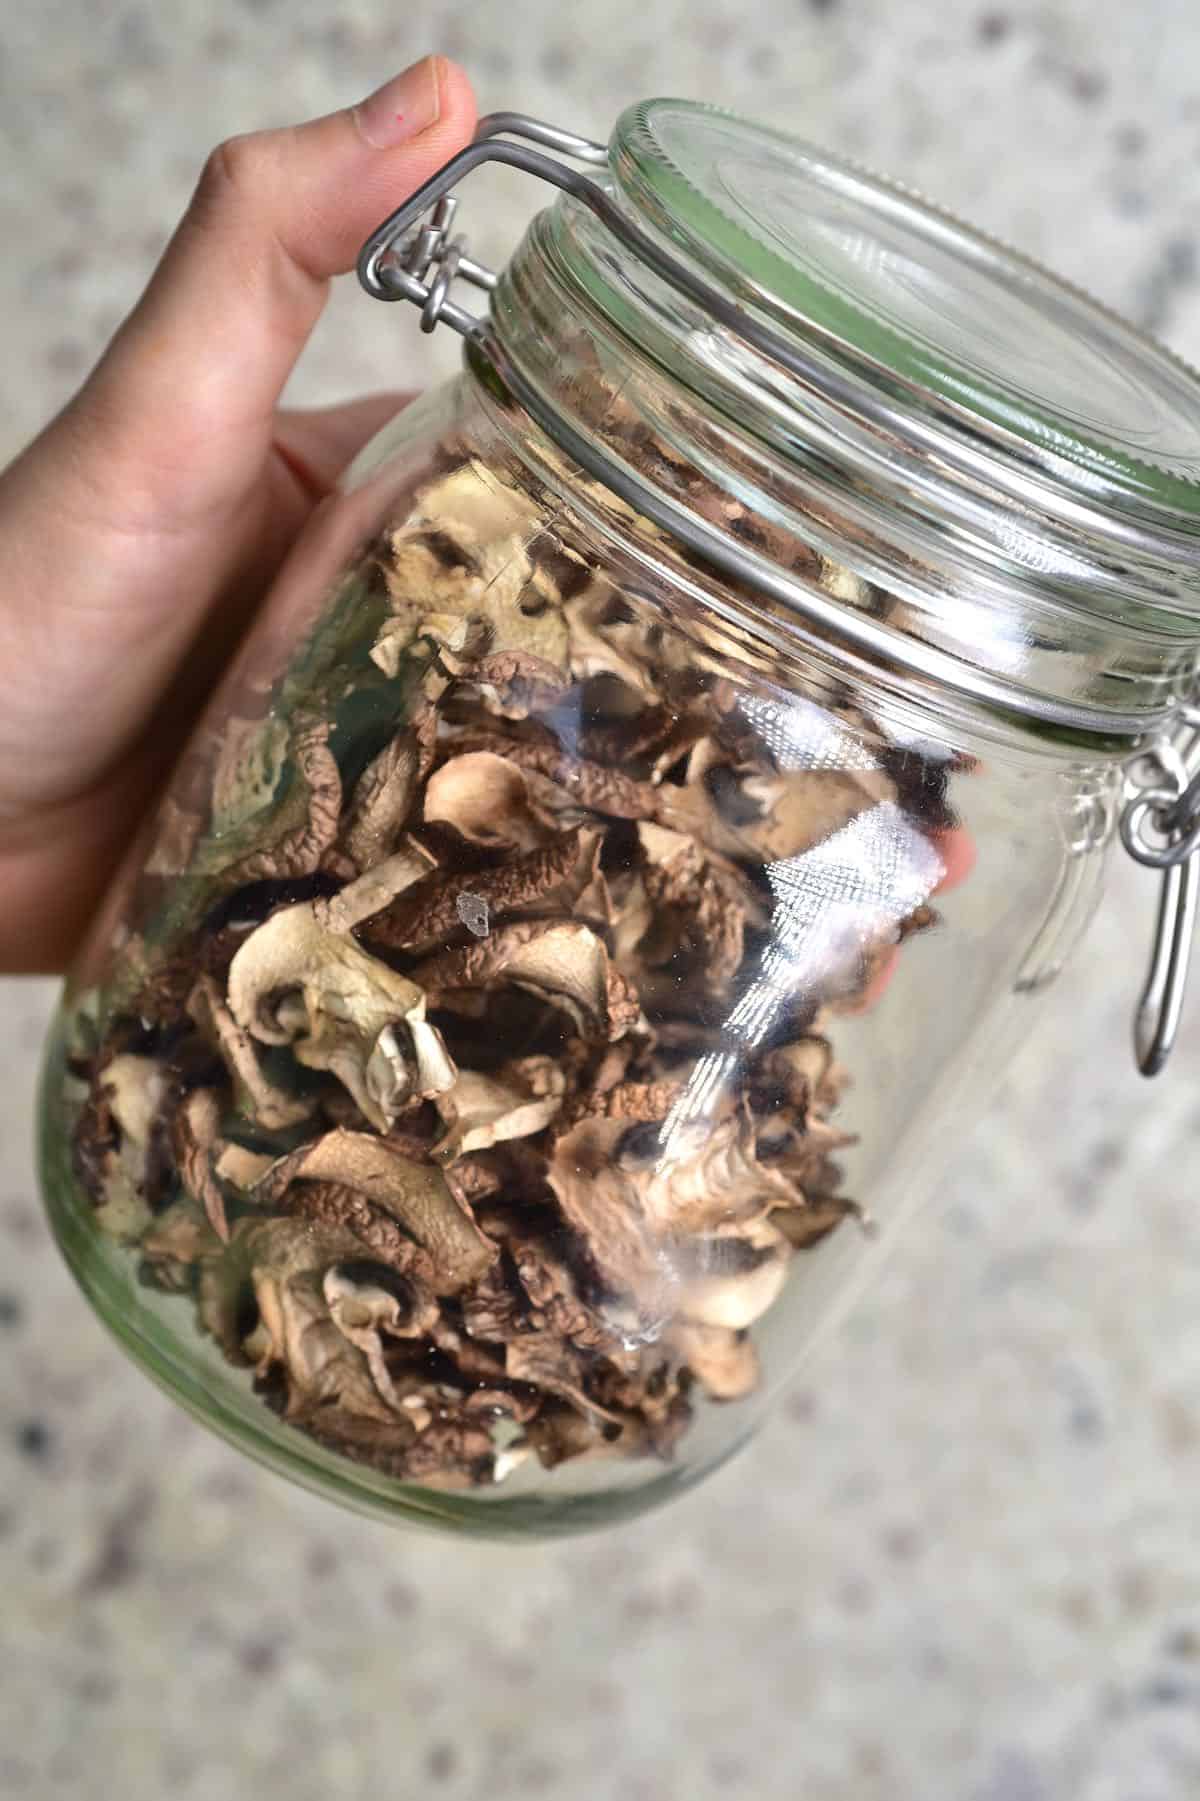 https://www.alphafoodie.com/wp-content/uploads/2021/02/How-to-Dry-mushrooms-5-of-5.jpeg